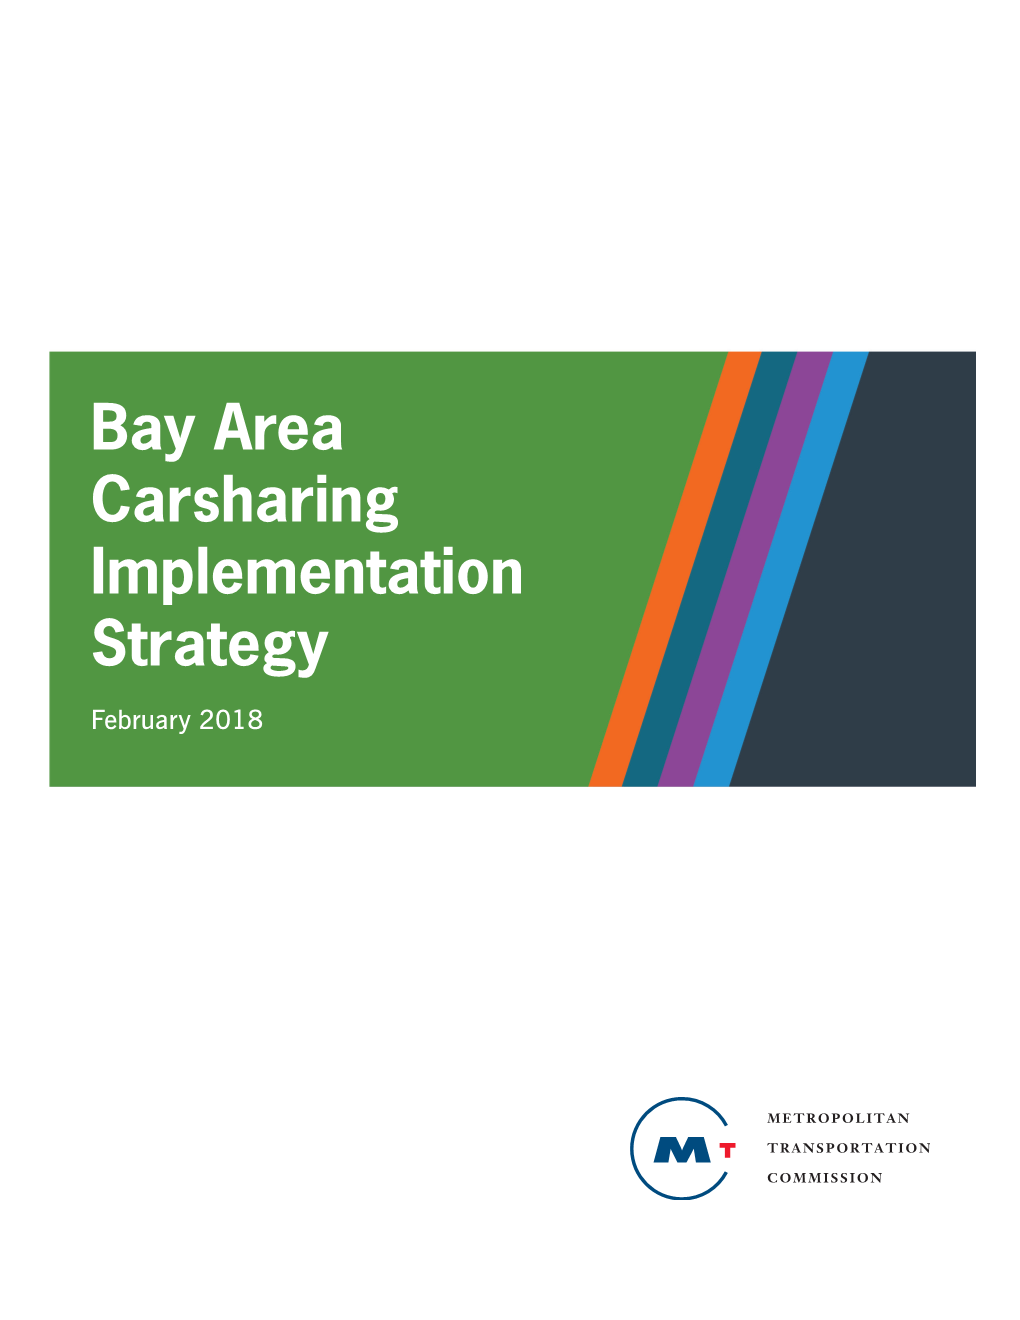 Bay Area Carsharing Implementation Strategy